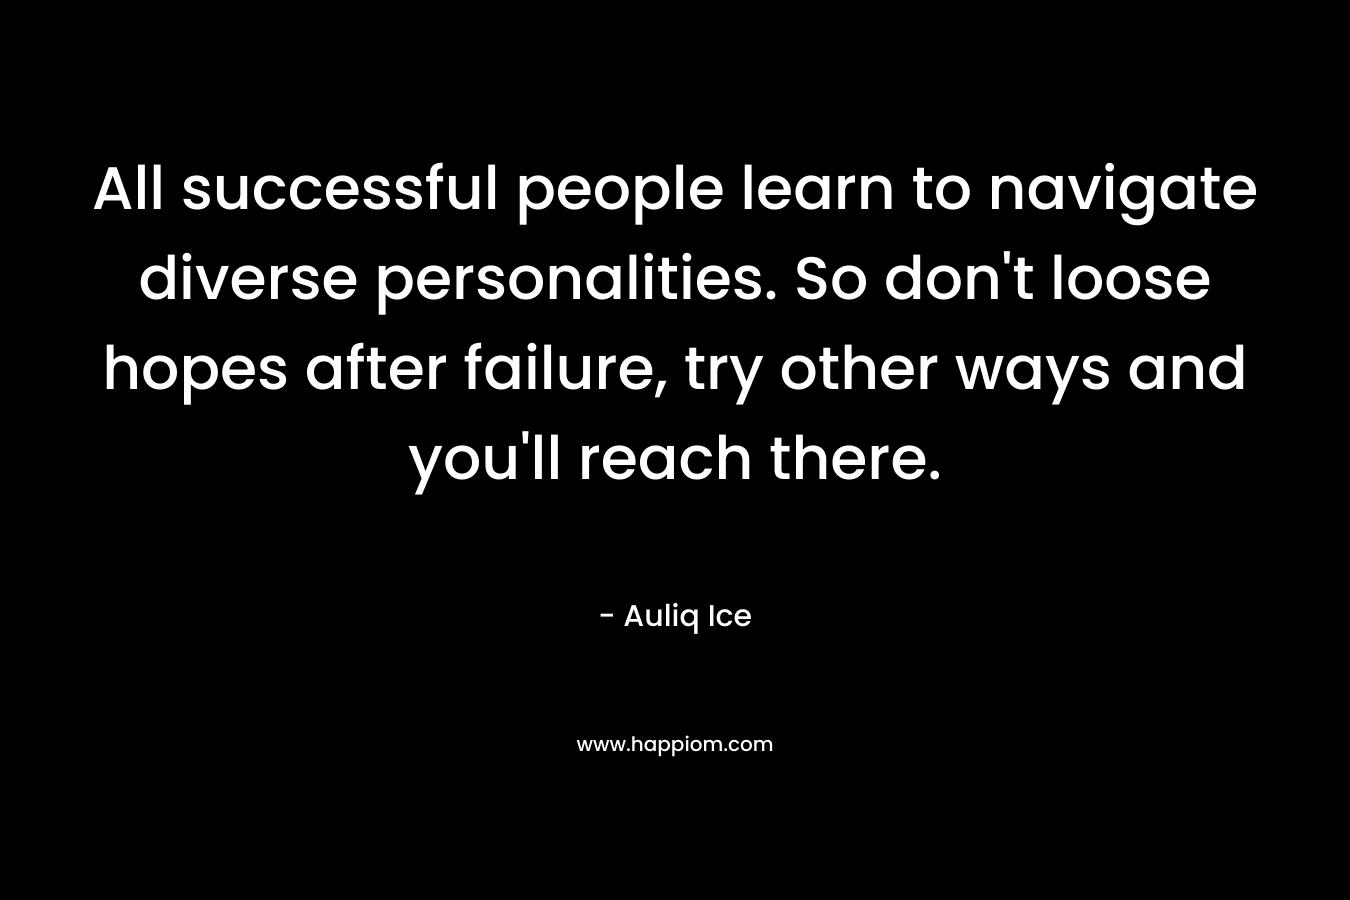 All successful people learn to navigate diverse personalities. So don't loose hopes after failure, try other ways and you'll reach there.